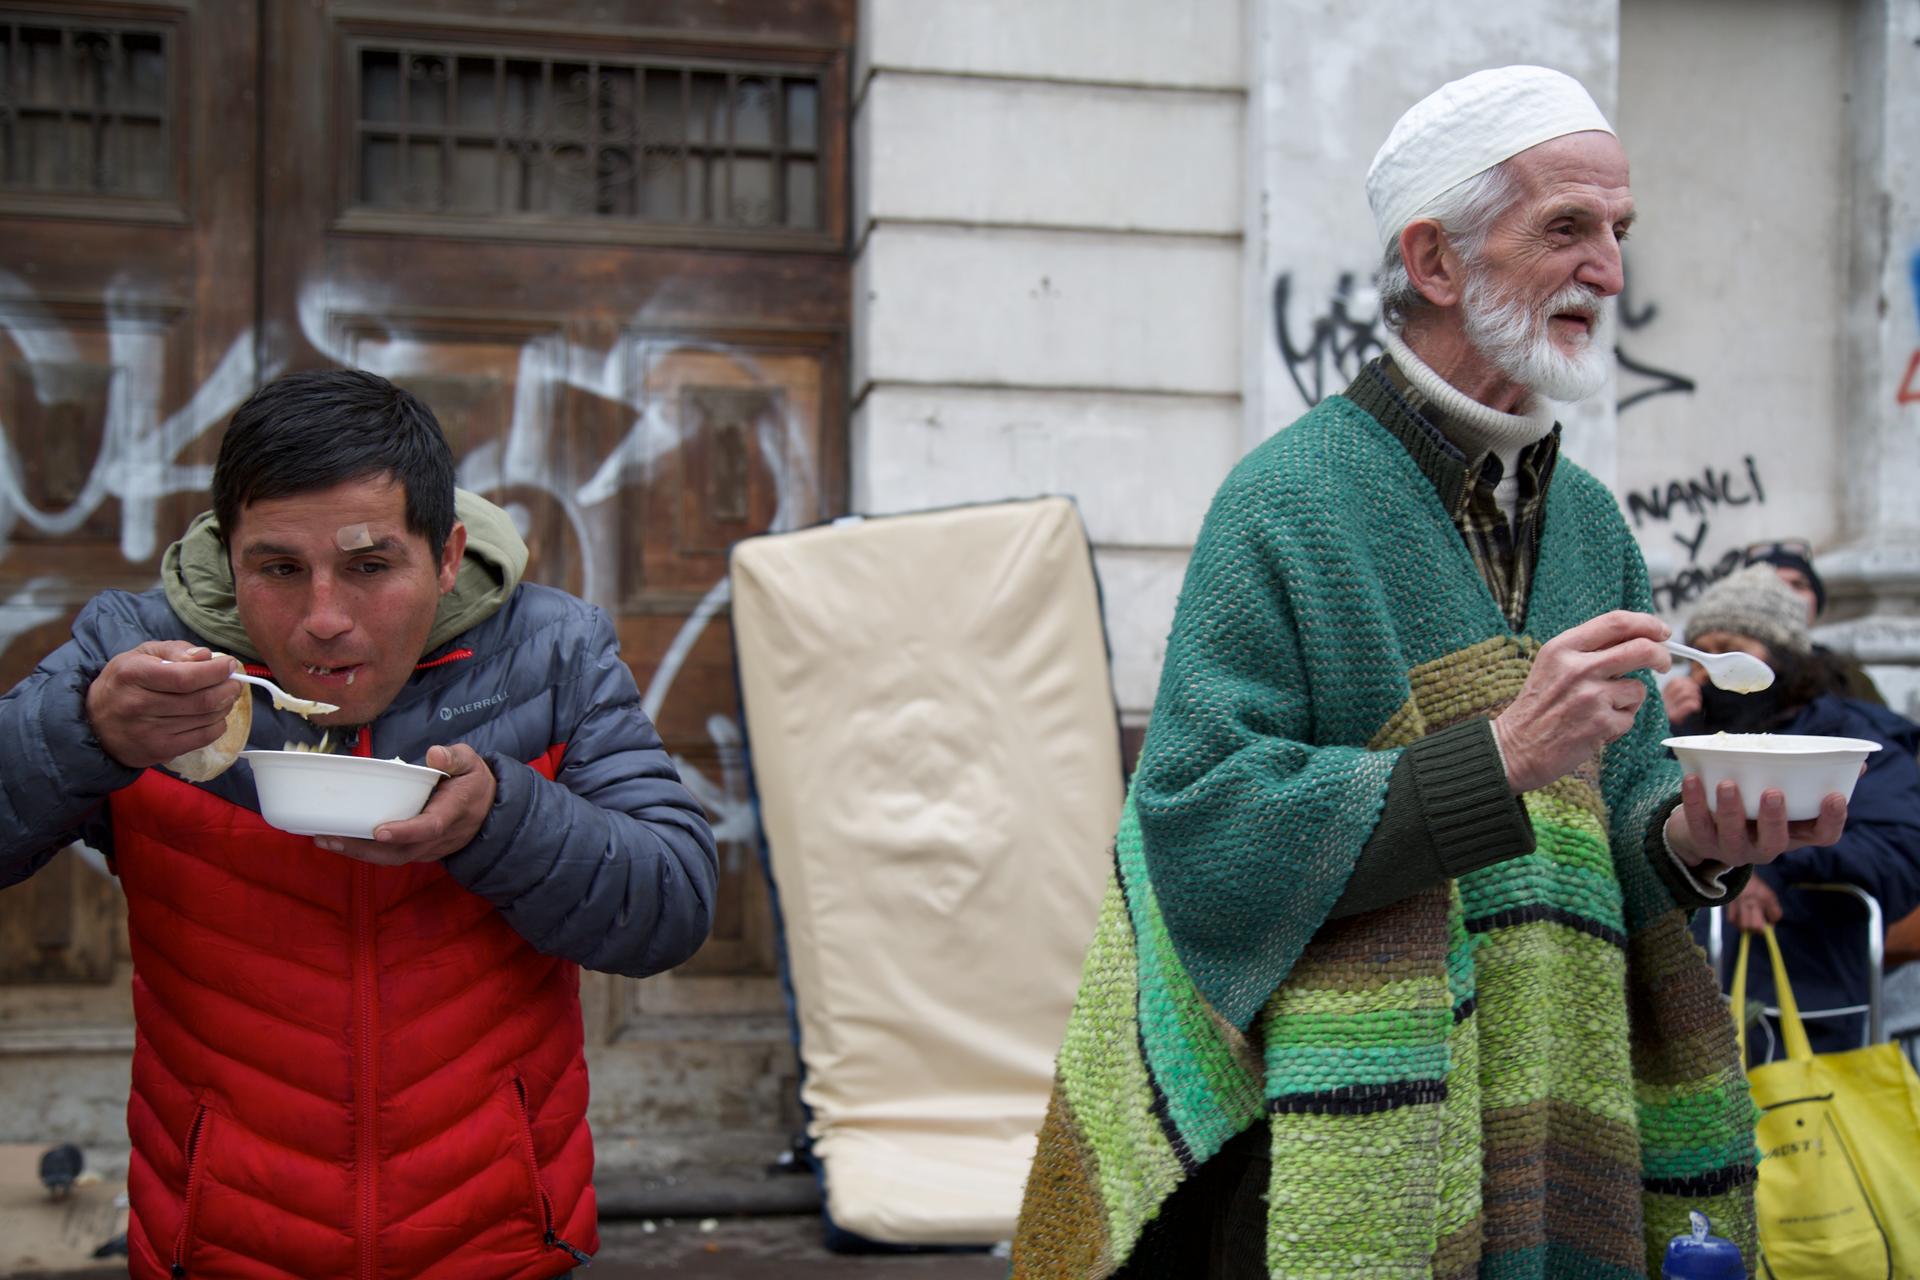 Chilean Muslims and people from other religious communities eating a meal from bowls, outside at the weekly soup kitchen in Santiago, Chile.